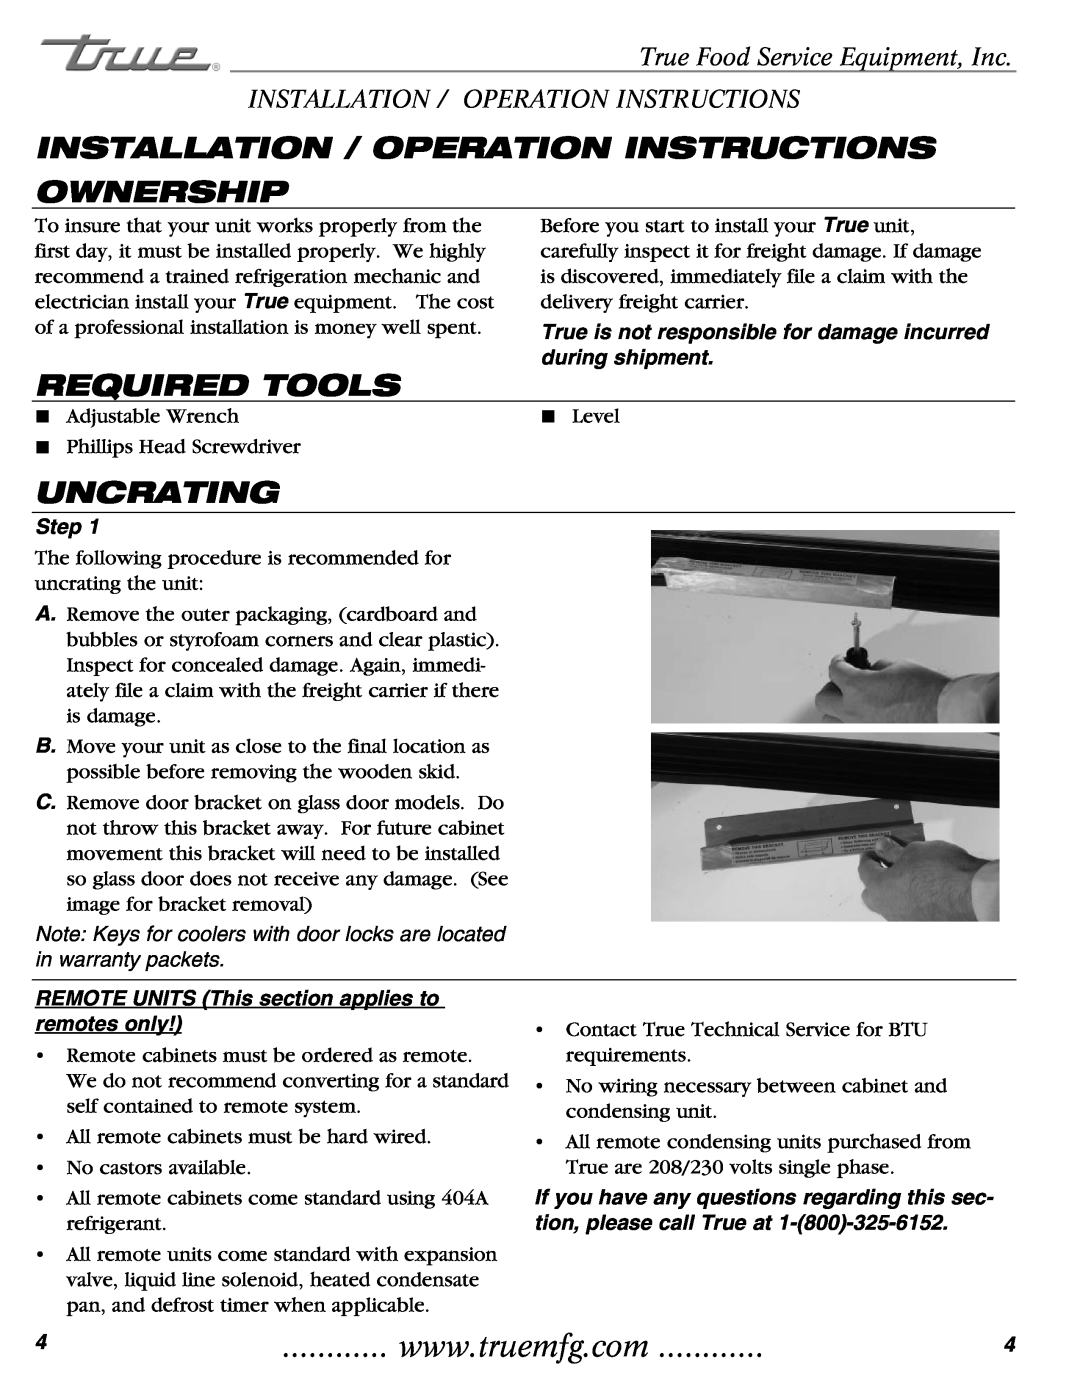 True Manufacturing Company TR1RRI-1S Installation / Operation Instructions Ownership, Required Tools, Uncrating, Step 